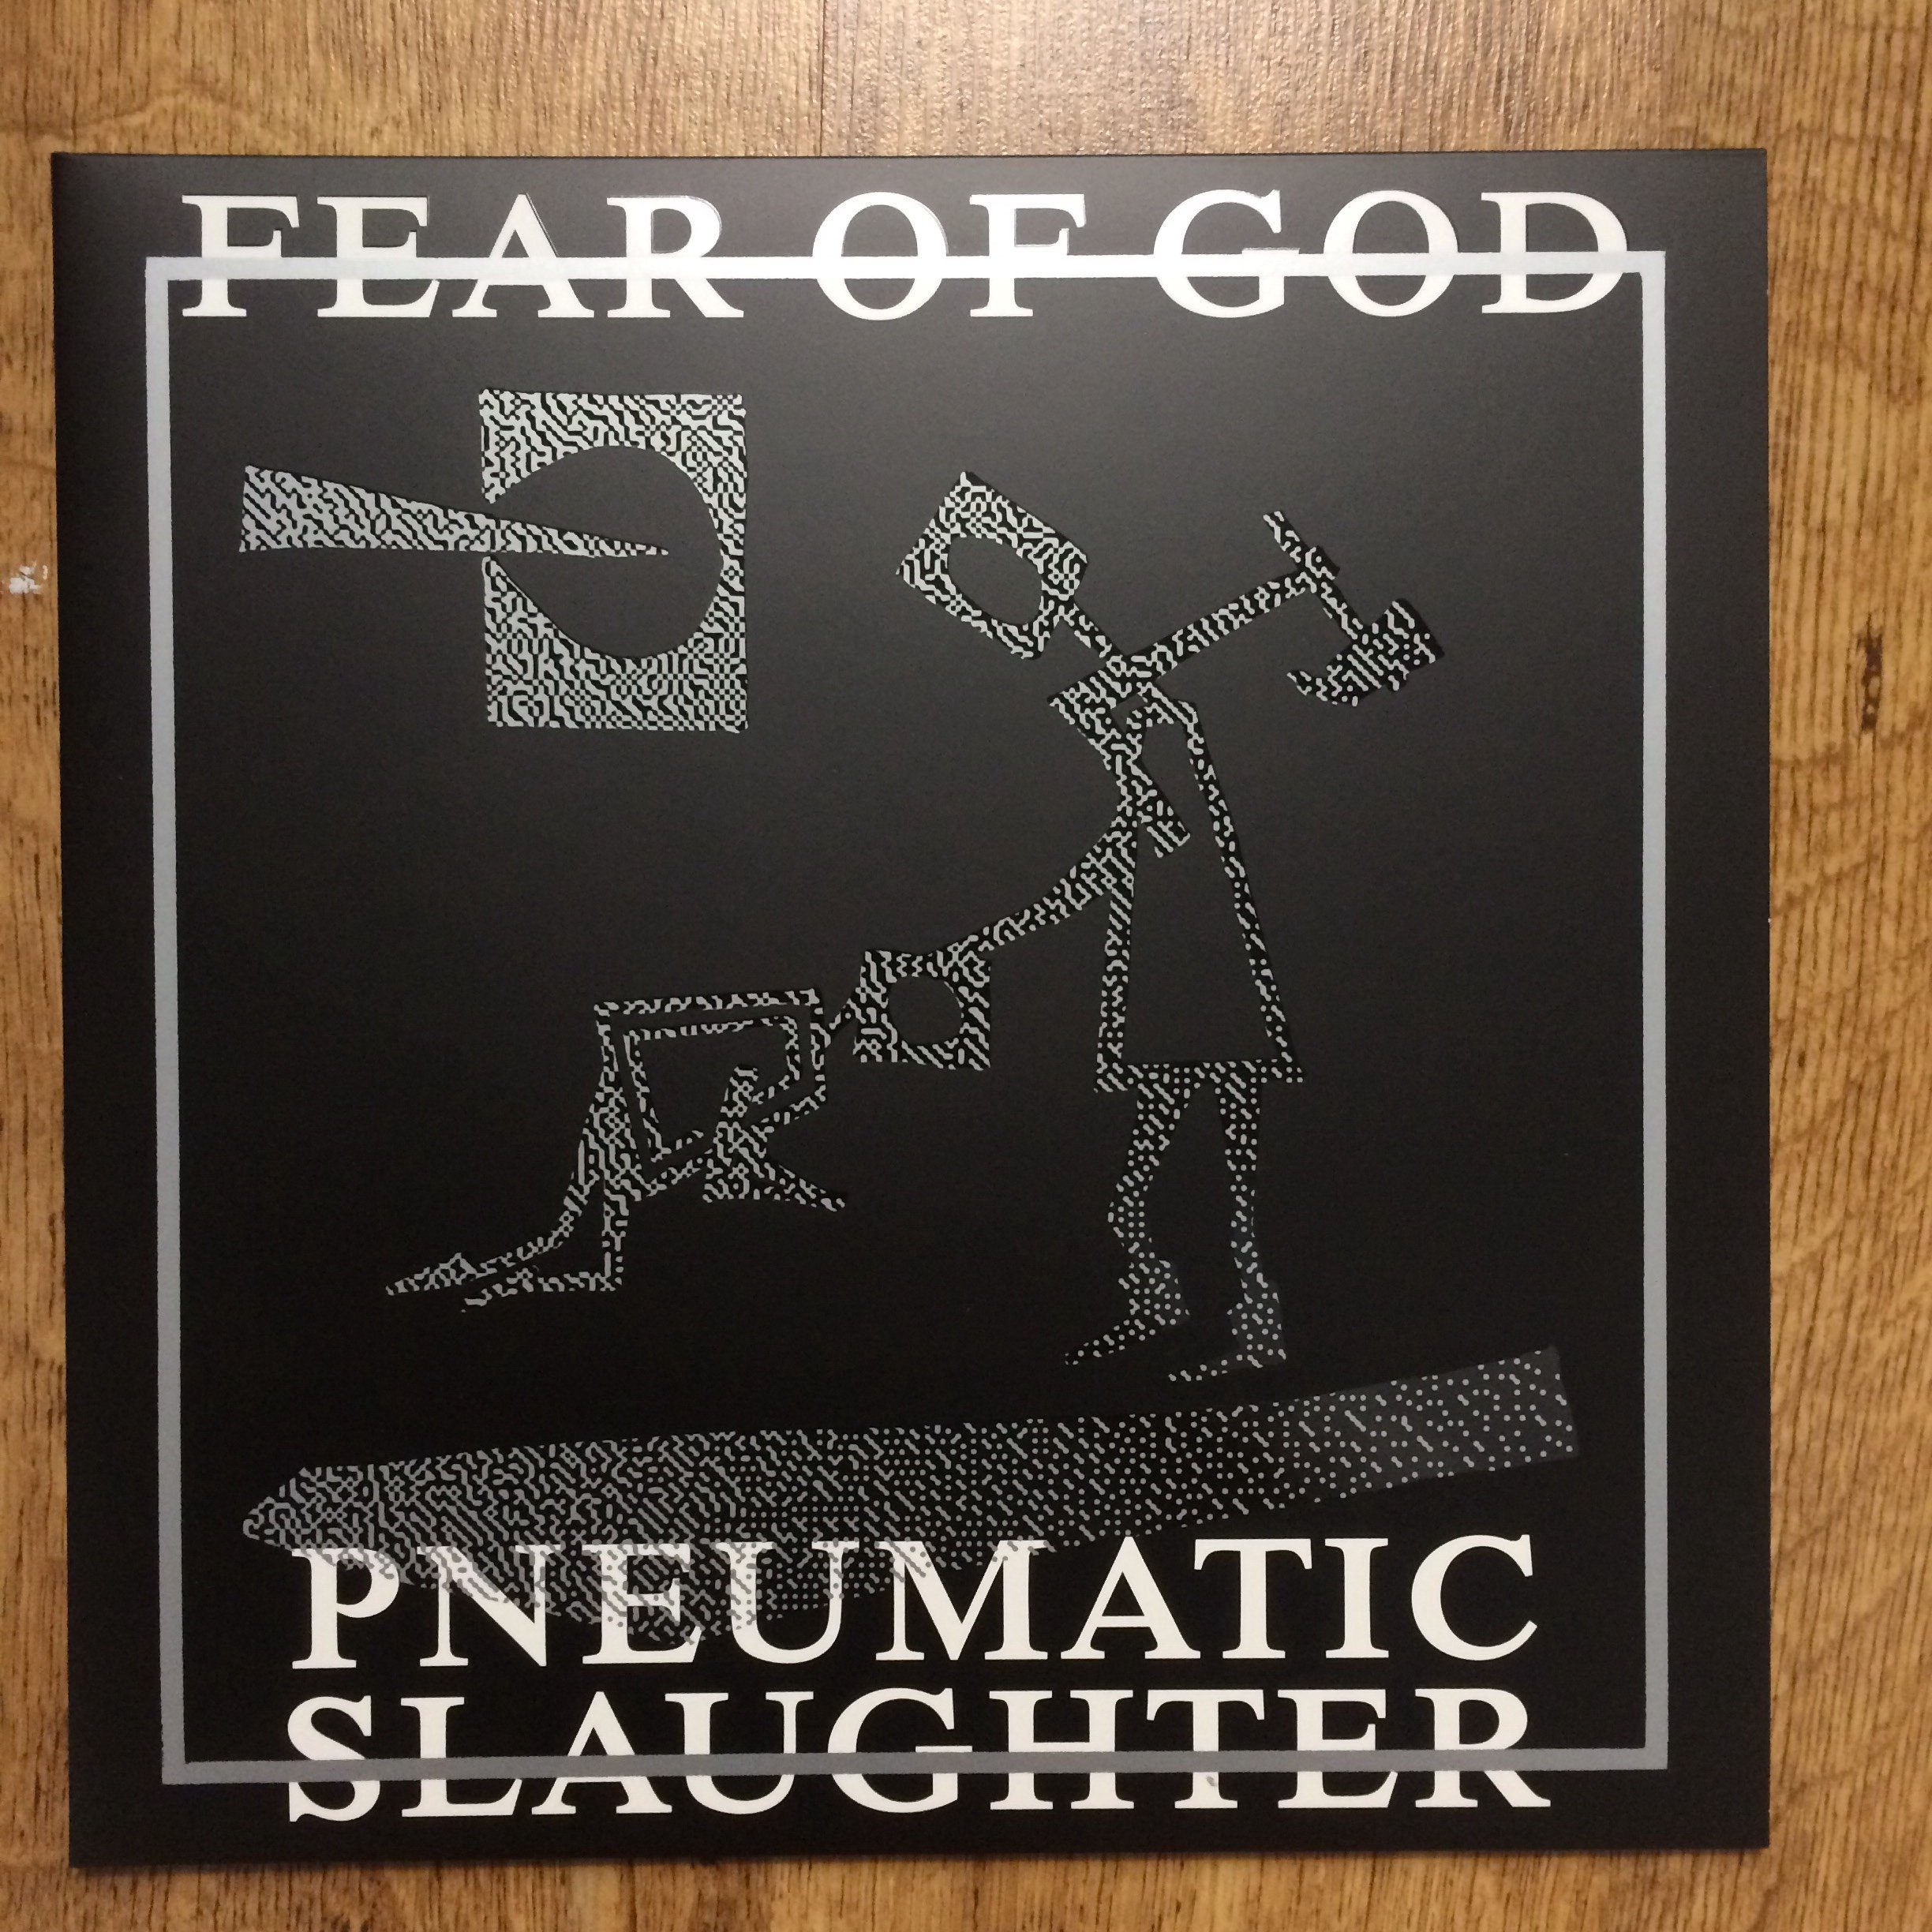 Photo of the Fear Of God - "Pneumatic Slaughter - Extended" LP (Black vinyl)